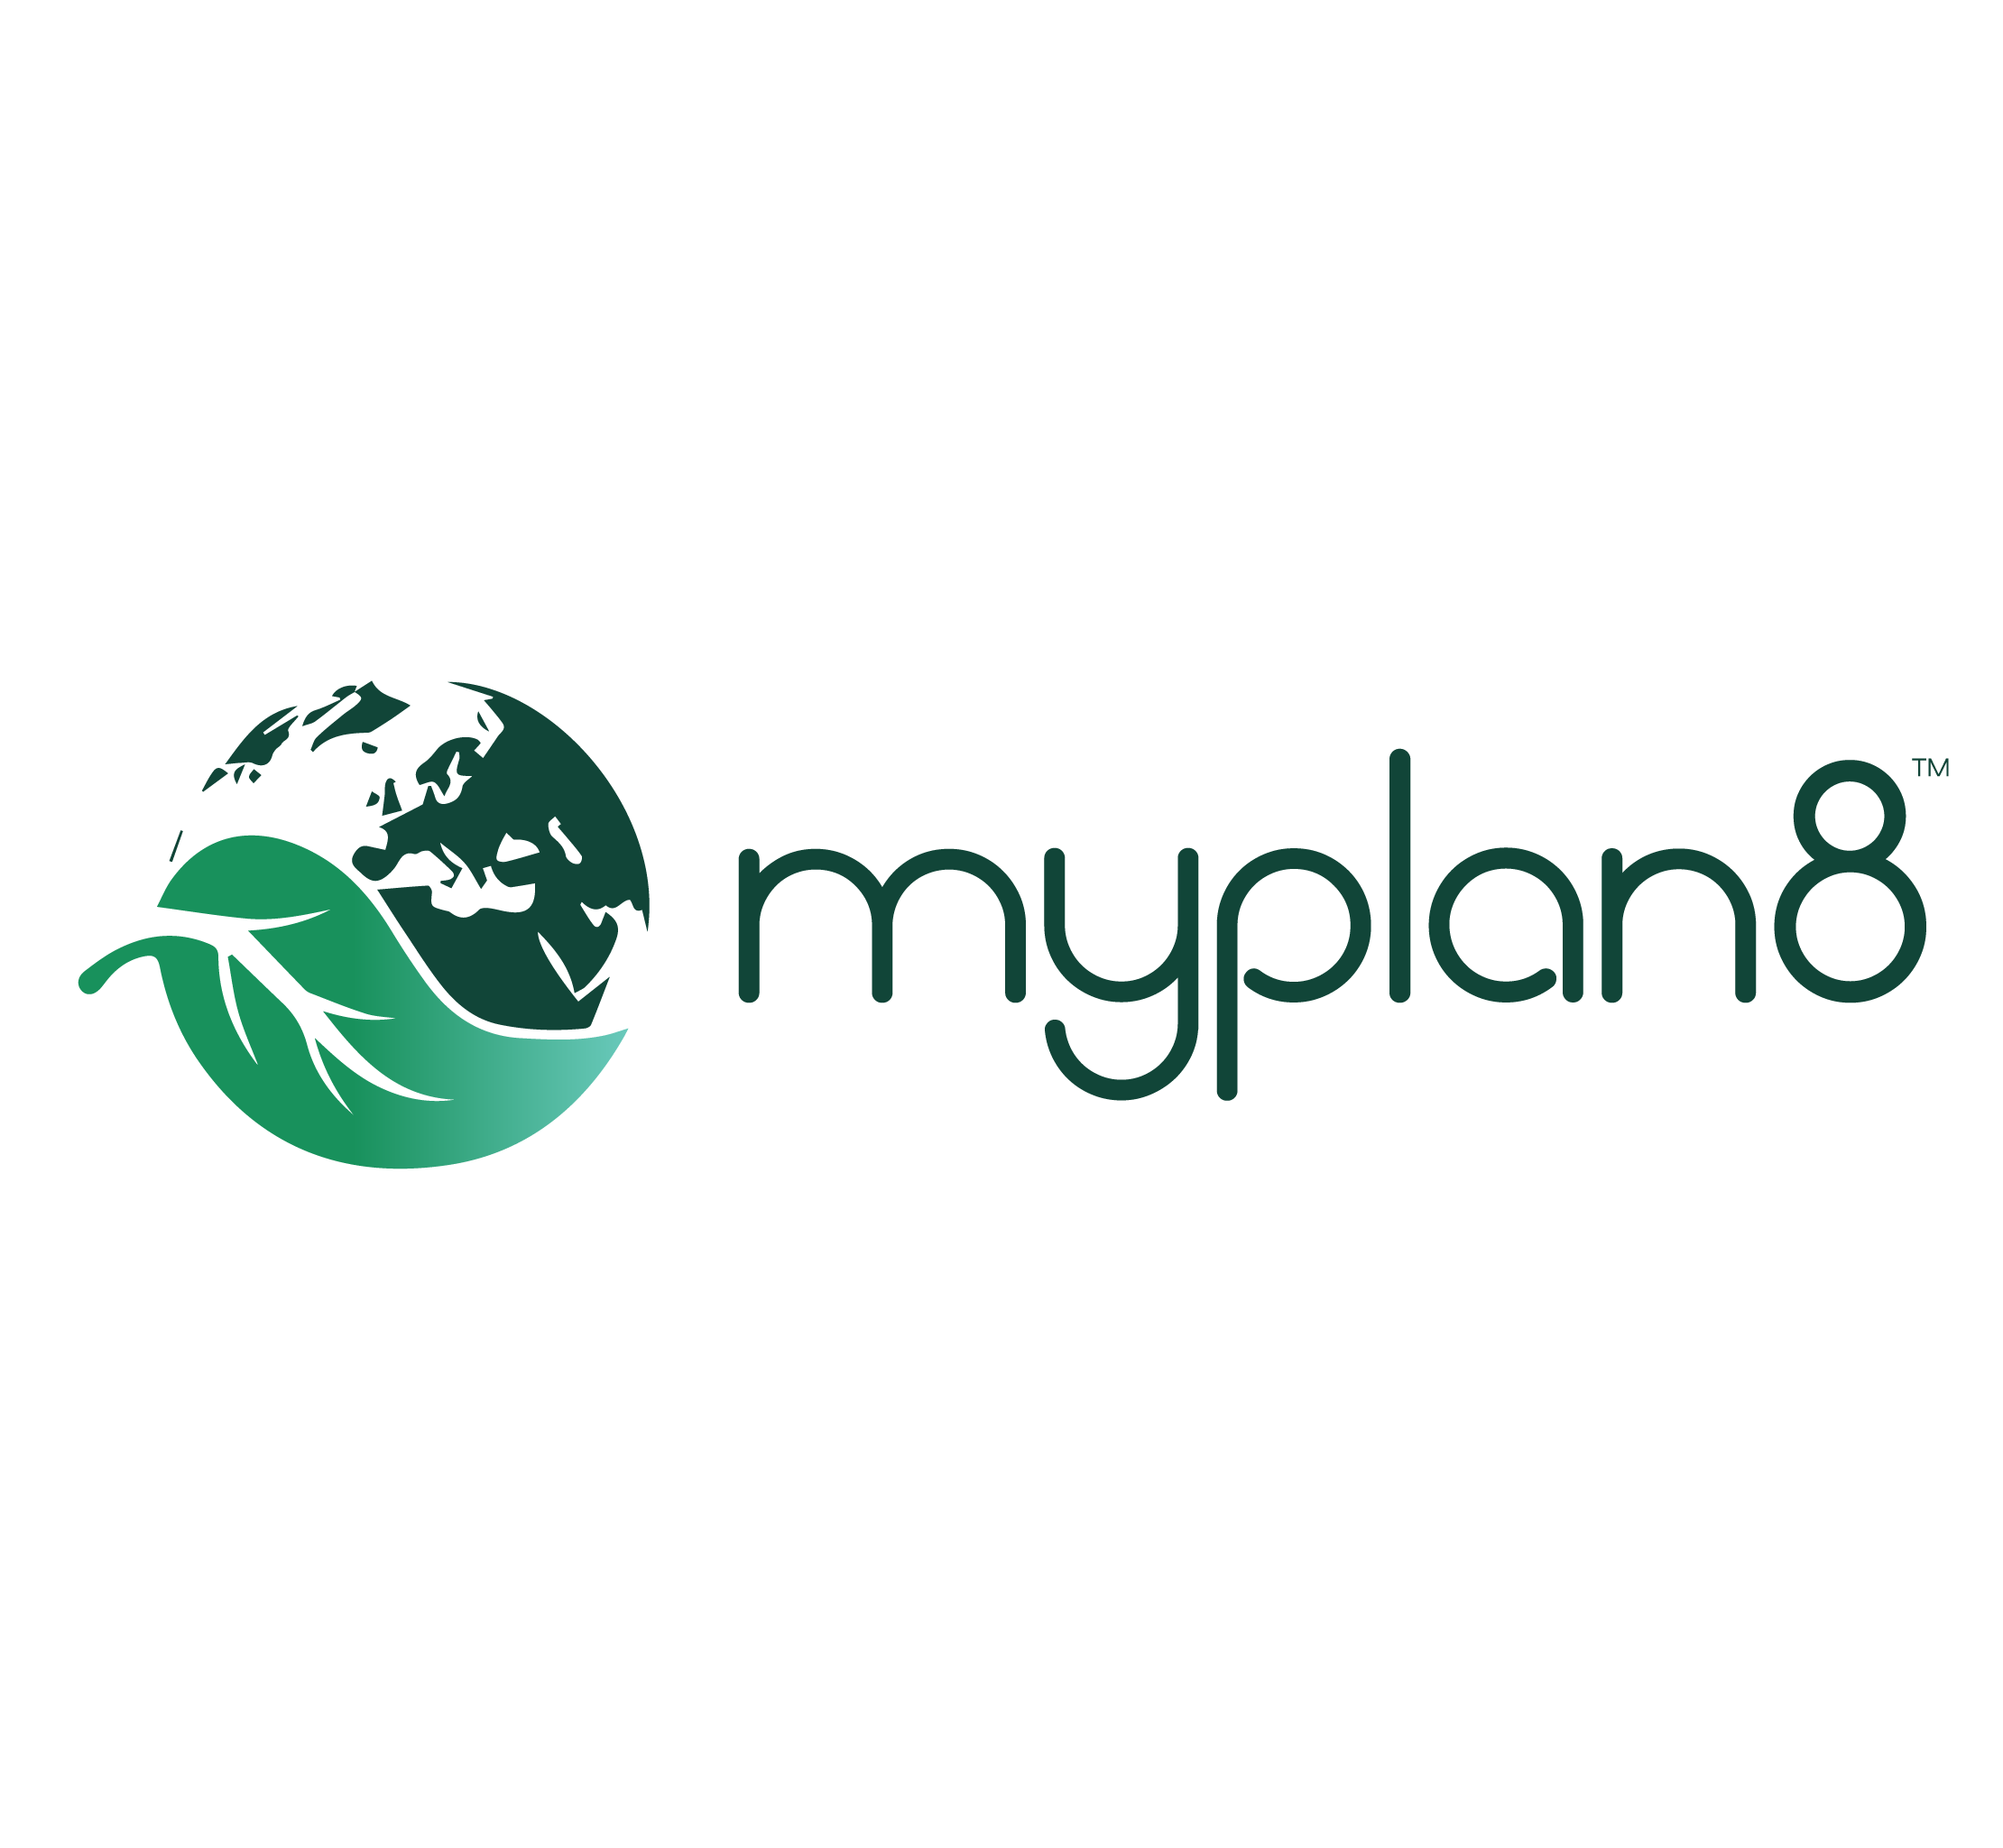 Green tech startup Myplan8 Launches Green Score™ Myplan8, a green-tech start-up, today announced its latest innovation - the world's first